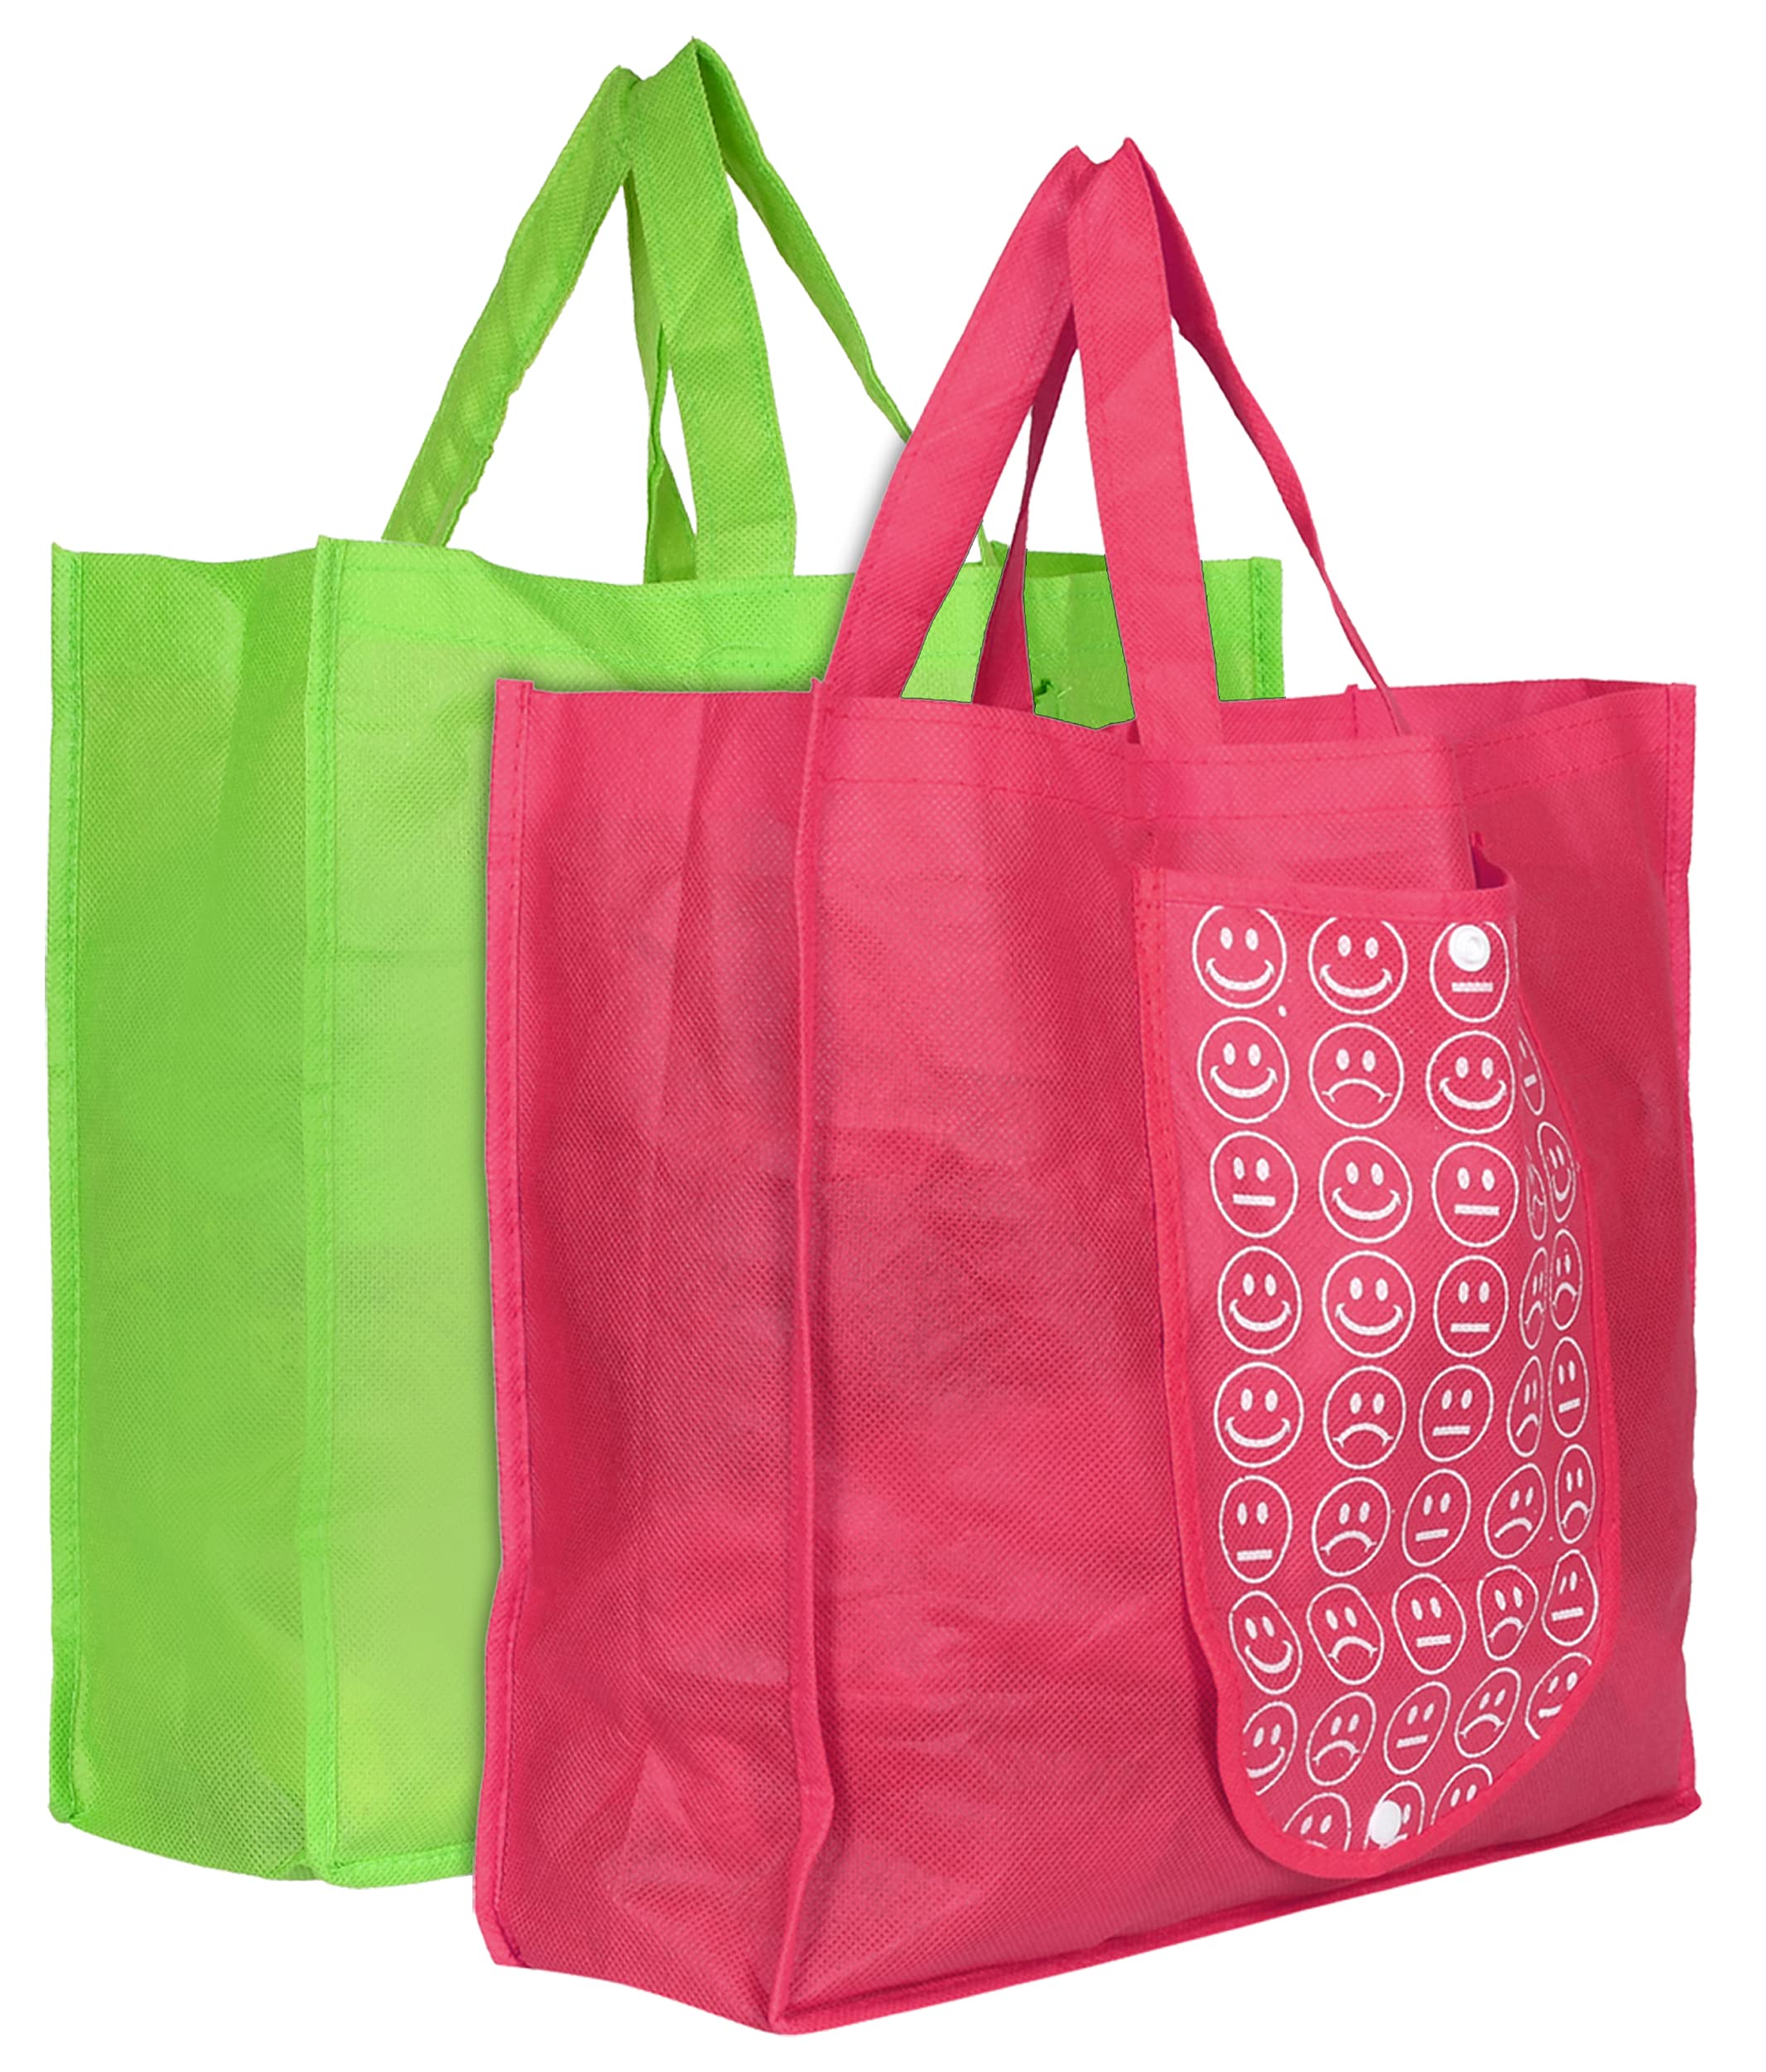 Kuber Industries Shopping Grocery Bags Foldable, Washable Grocery Tote Bag with One Small Pocket, Purse Bag Fits in Pocket Waterproof & Lightweight (Set of 2,Green & Pink) (HS_36_KUBMART018753)